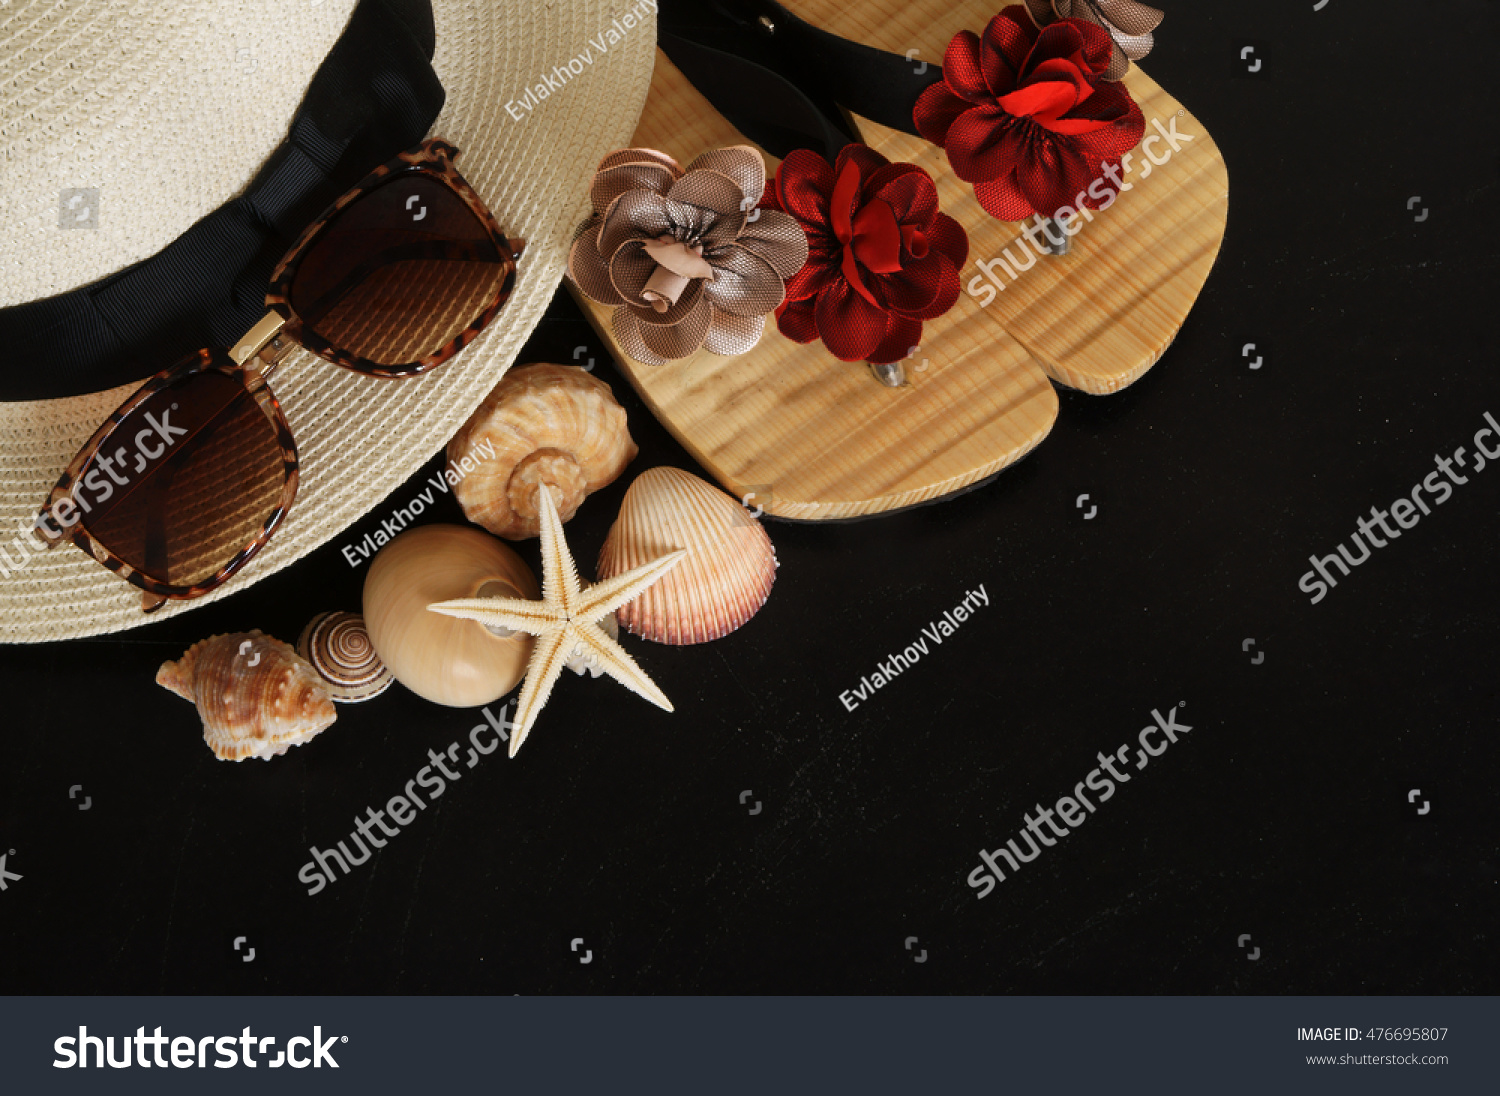 Summer vacation concept, hat, seashells and sunglasses on black grunge background #476695807